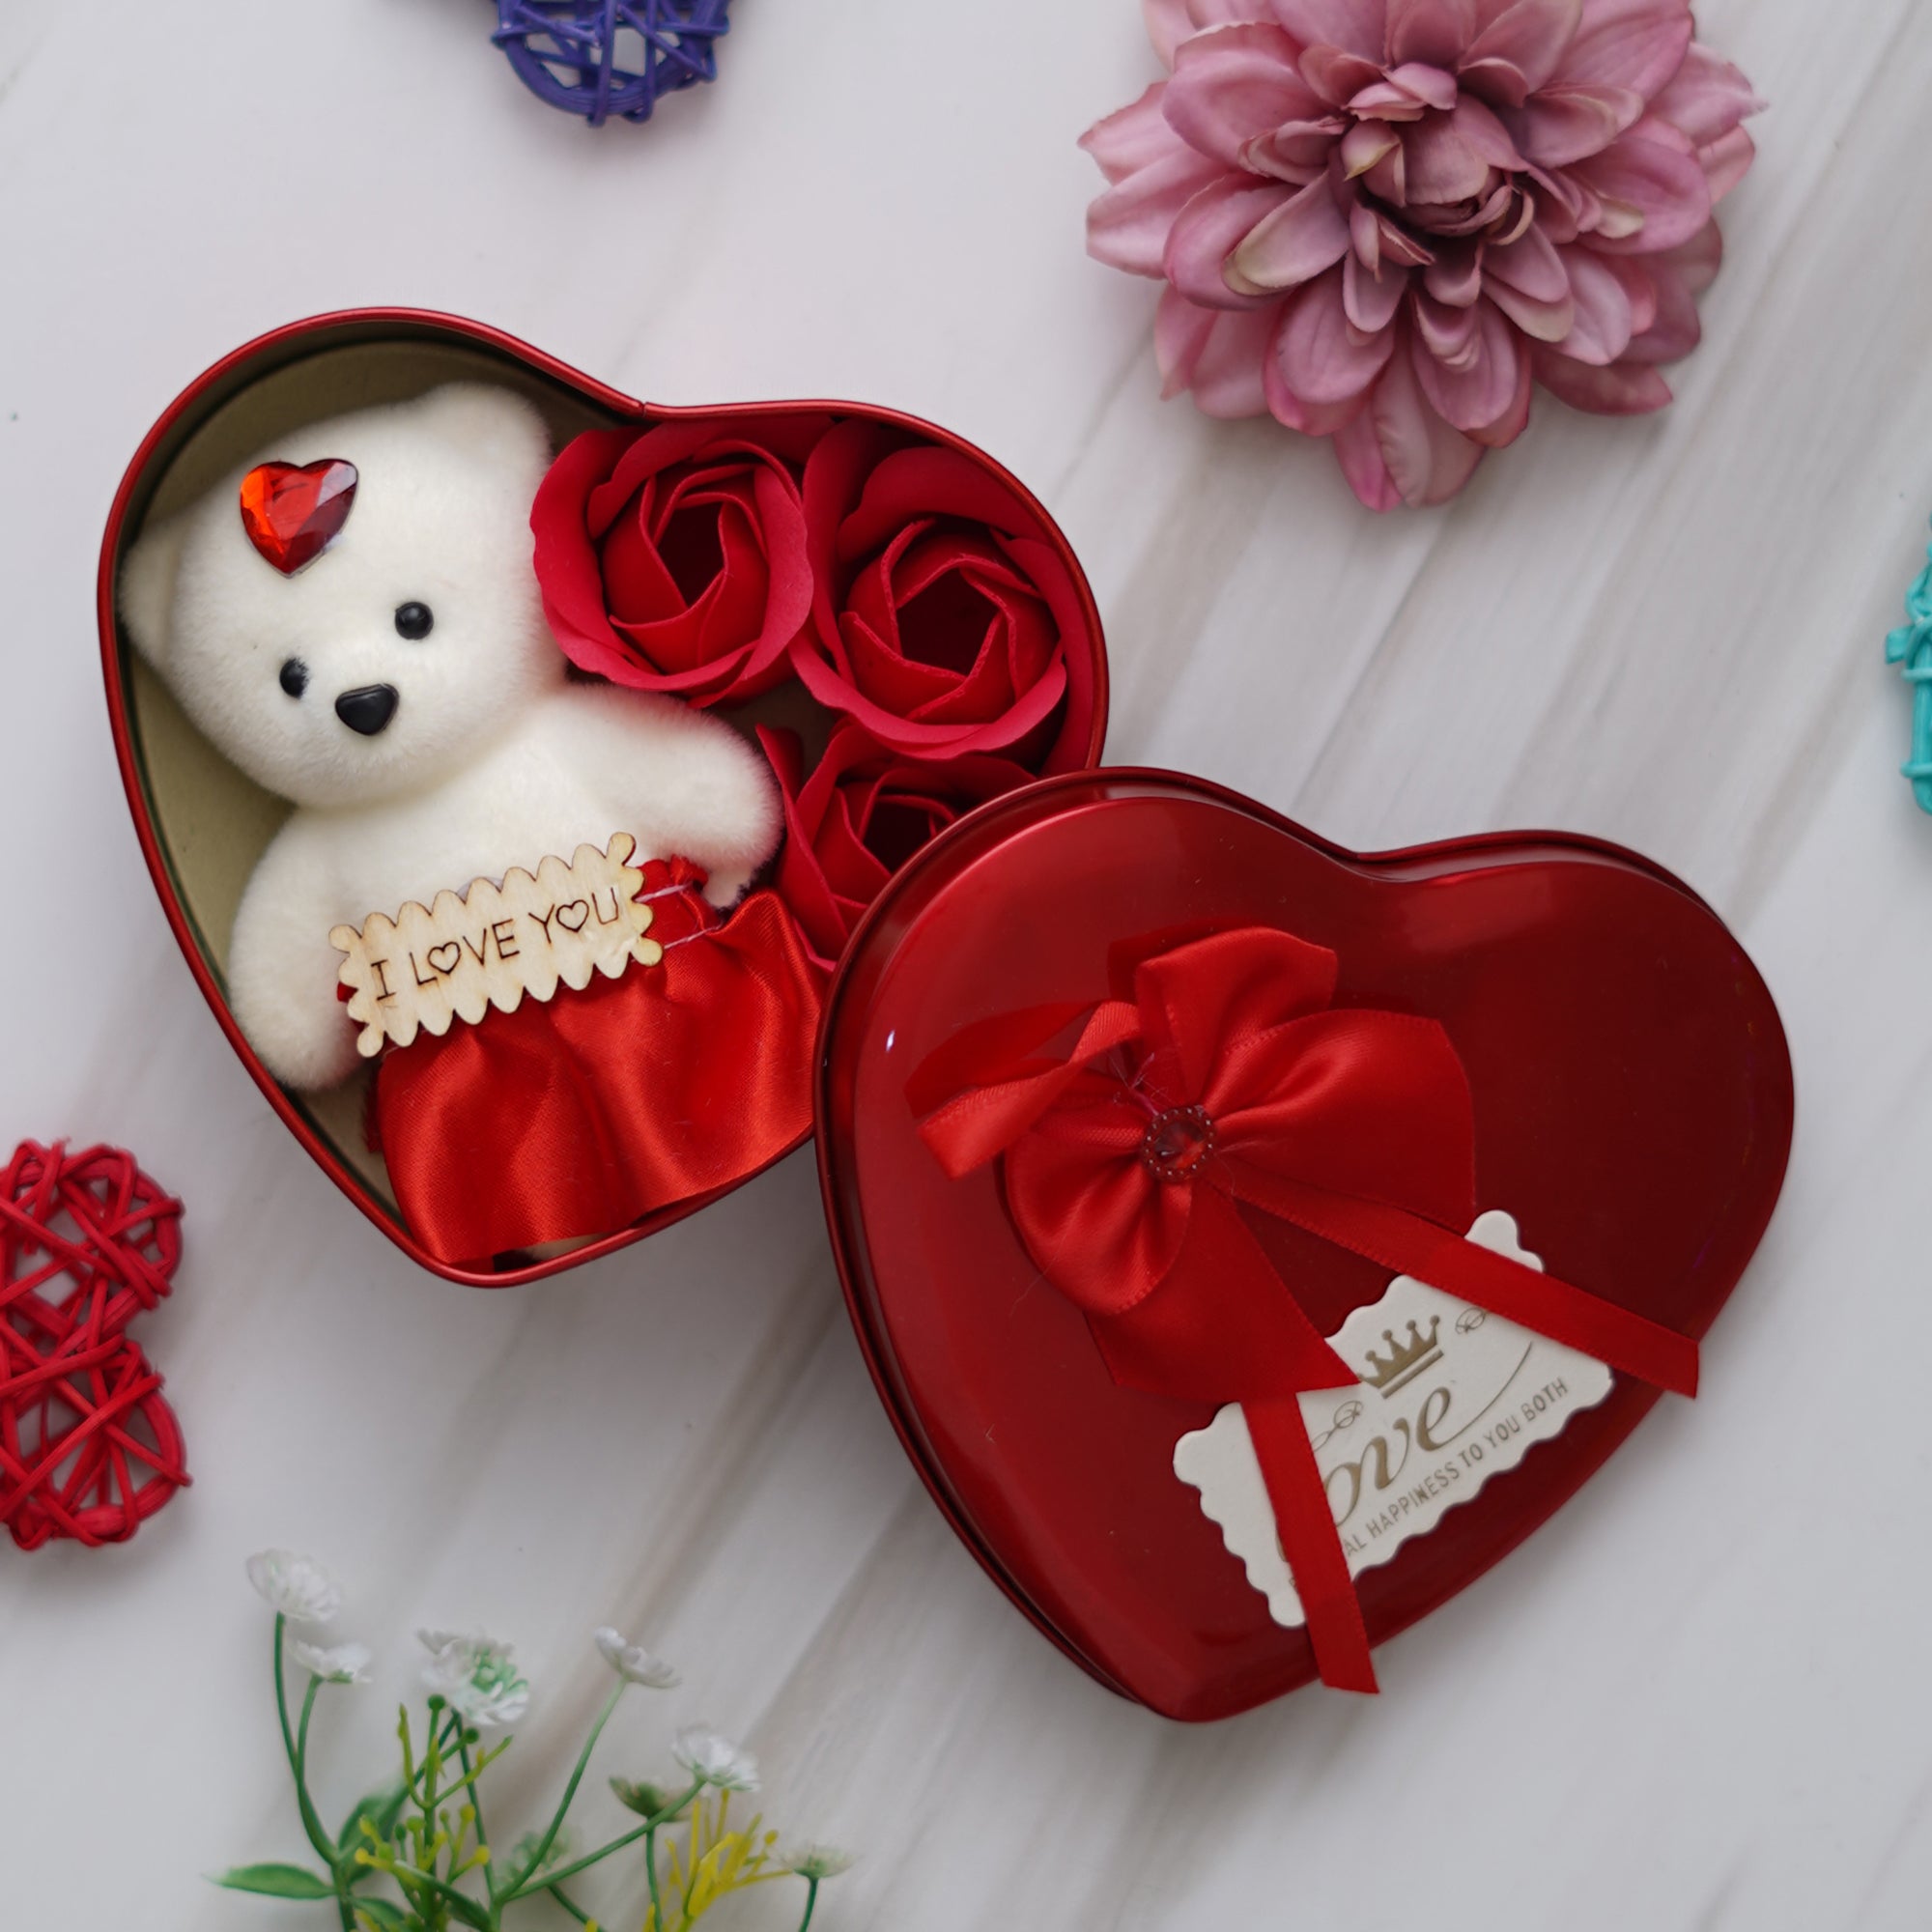 Valentine Combo of Golden Rose Gift Set, "My Heart Beats Only For You" Wooden Showpiece With Stand, Heart Shaped Gift Box Set with White Teddy and Red Roses 5